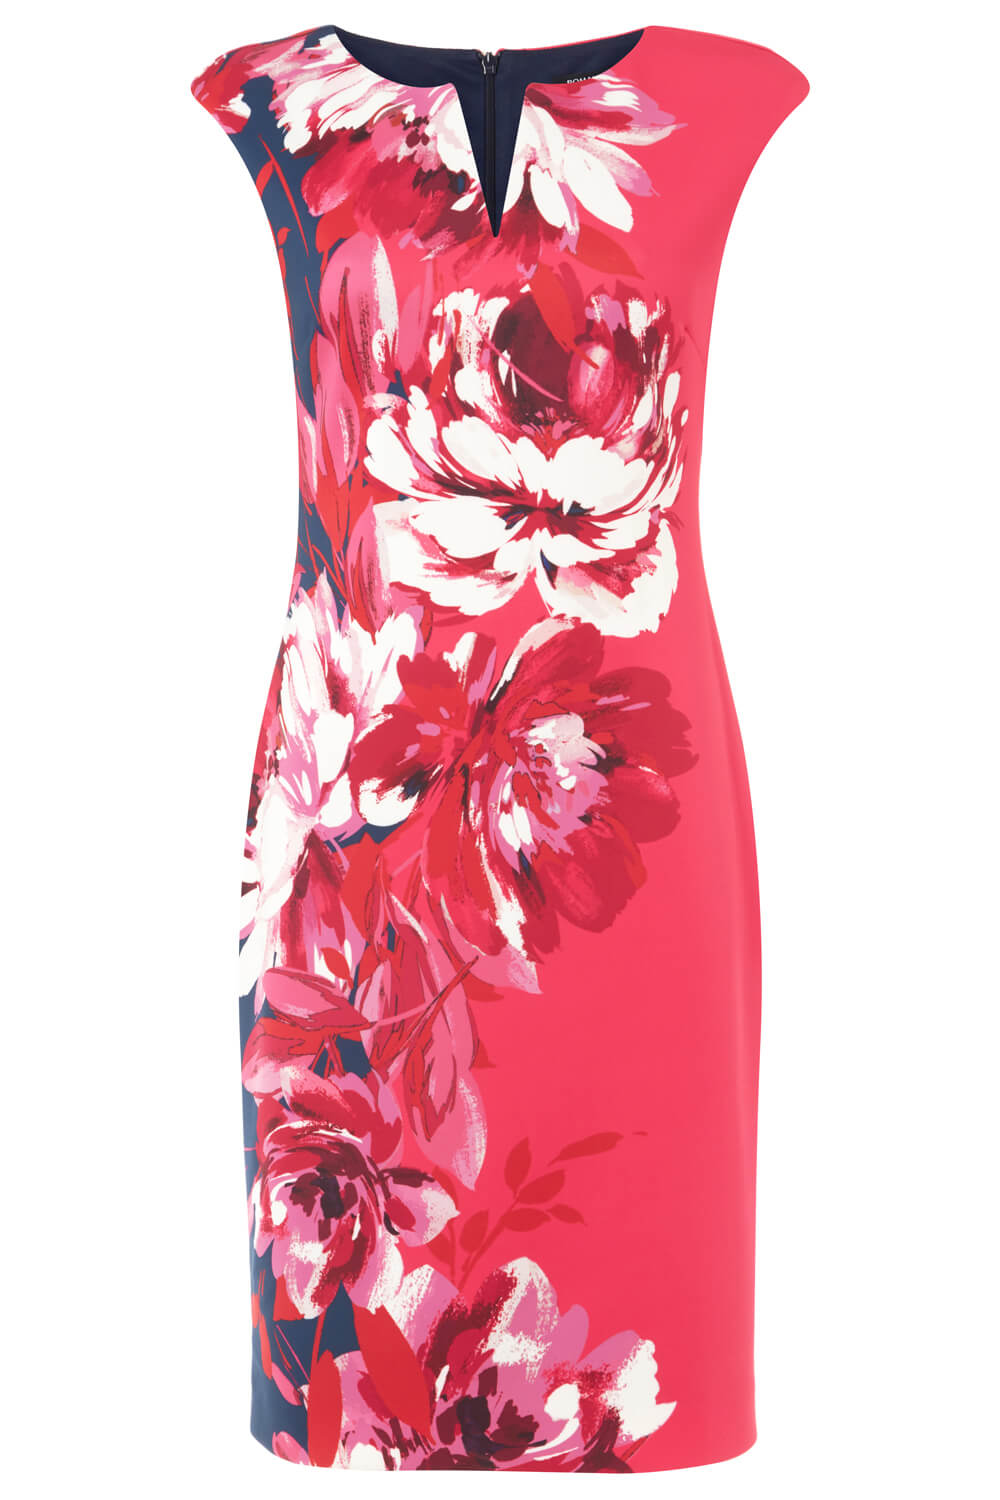 Fuchsia Floral Print Fitted Premium Stretch Dress, Image 5 of 5